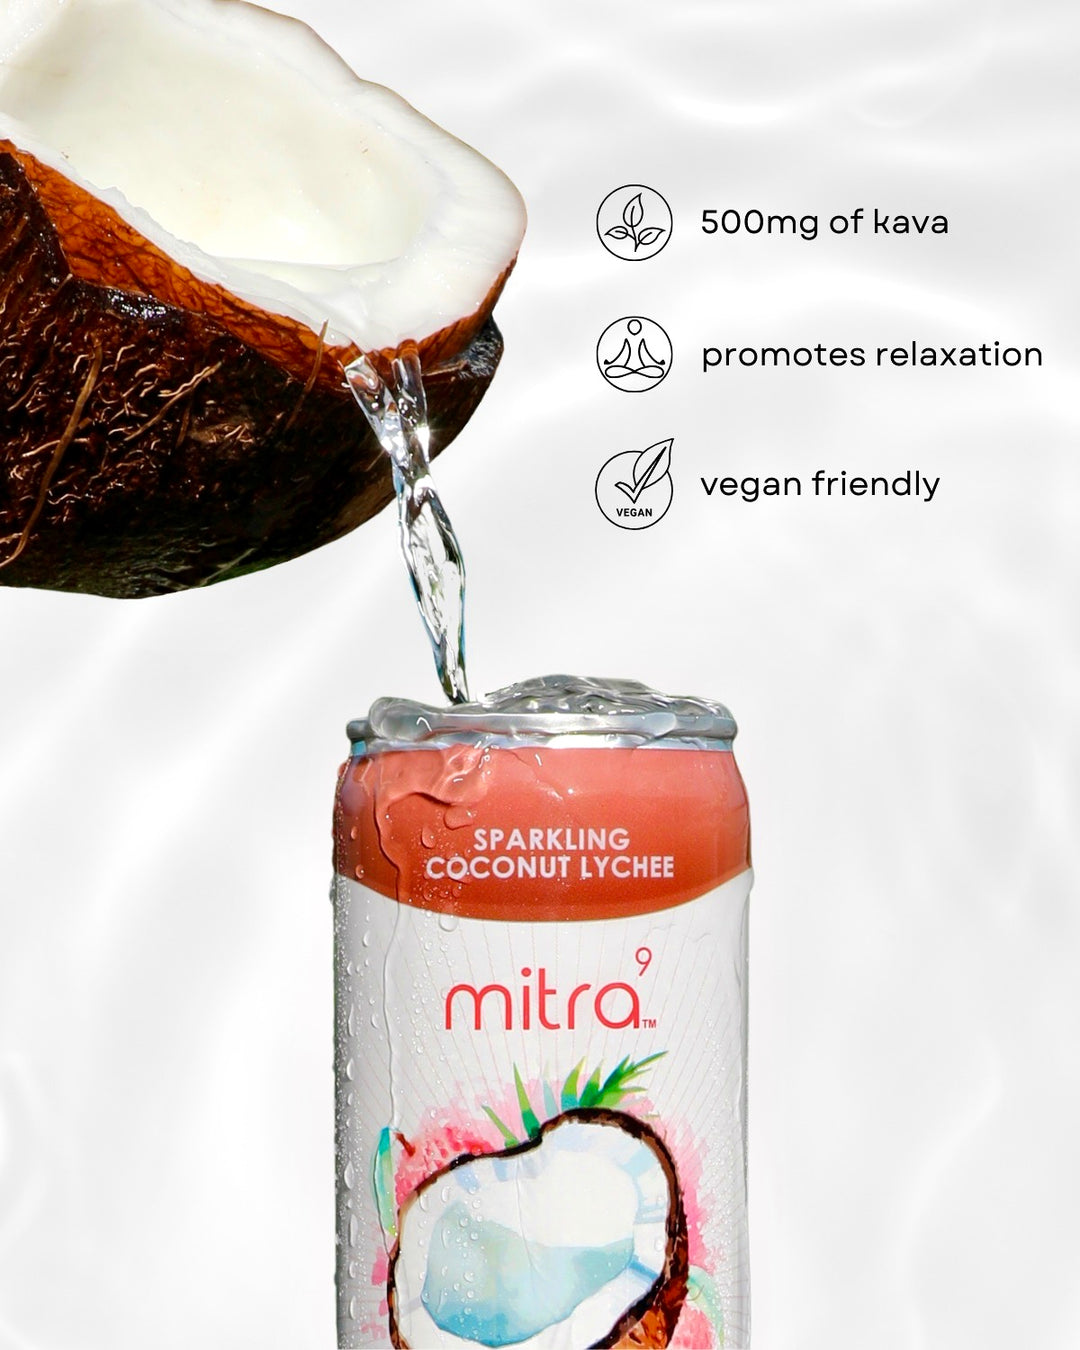 mitra9 kava drink coconut lychee flavor infographic